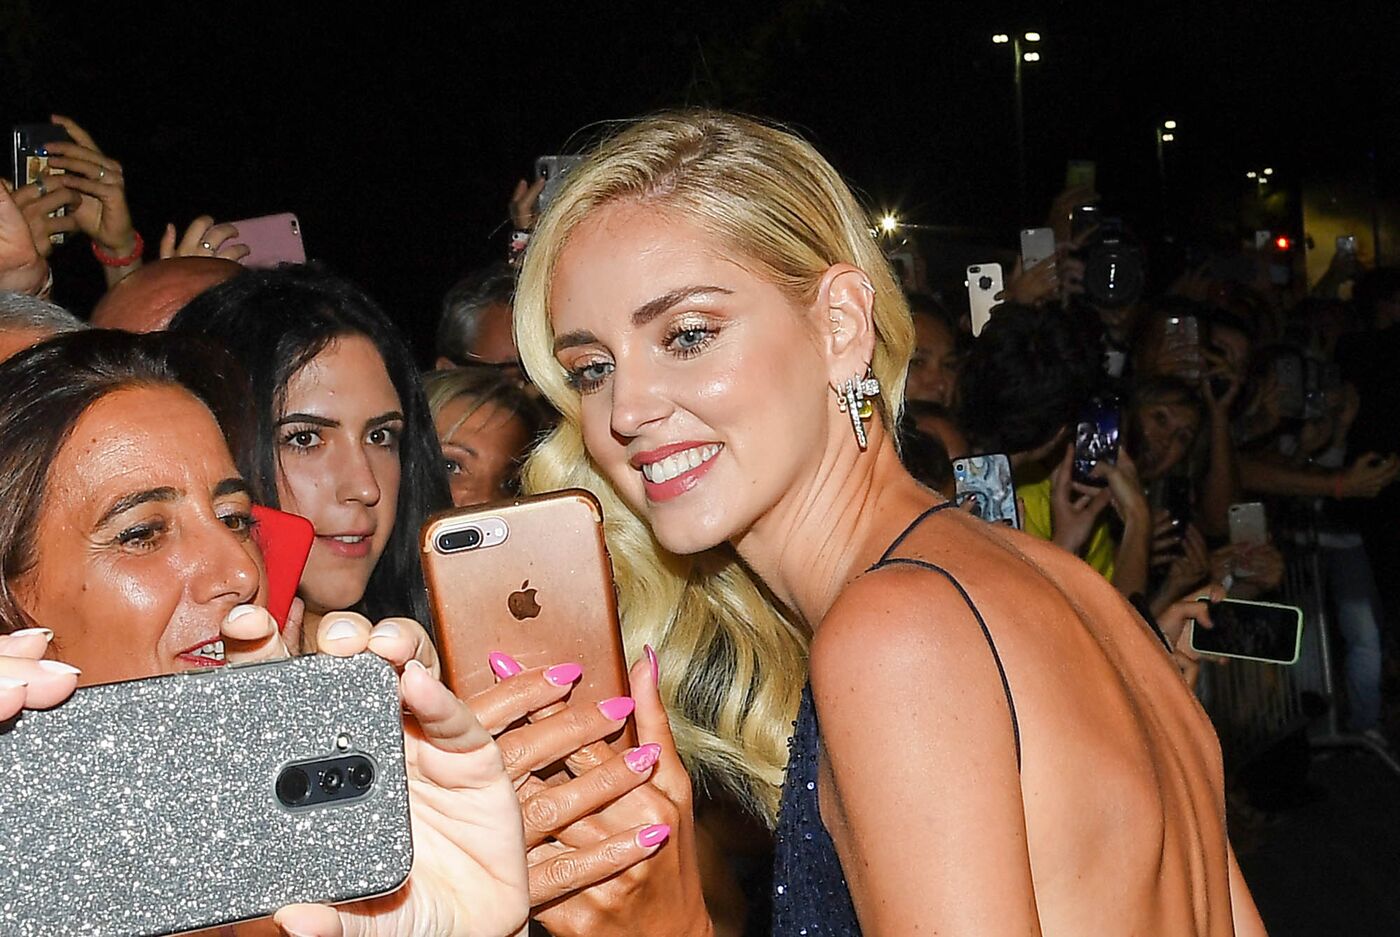 Influencer Chiara Ferragni Joins Tod's Board, Shares Rise - Bloomberg